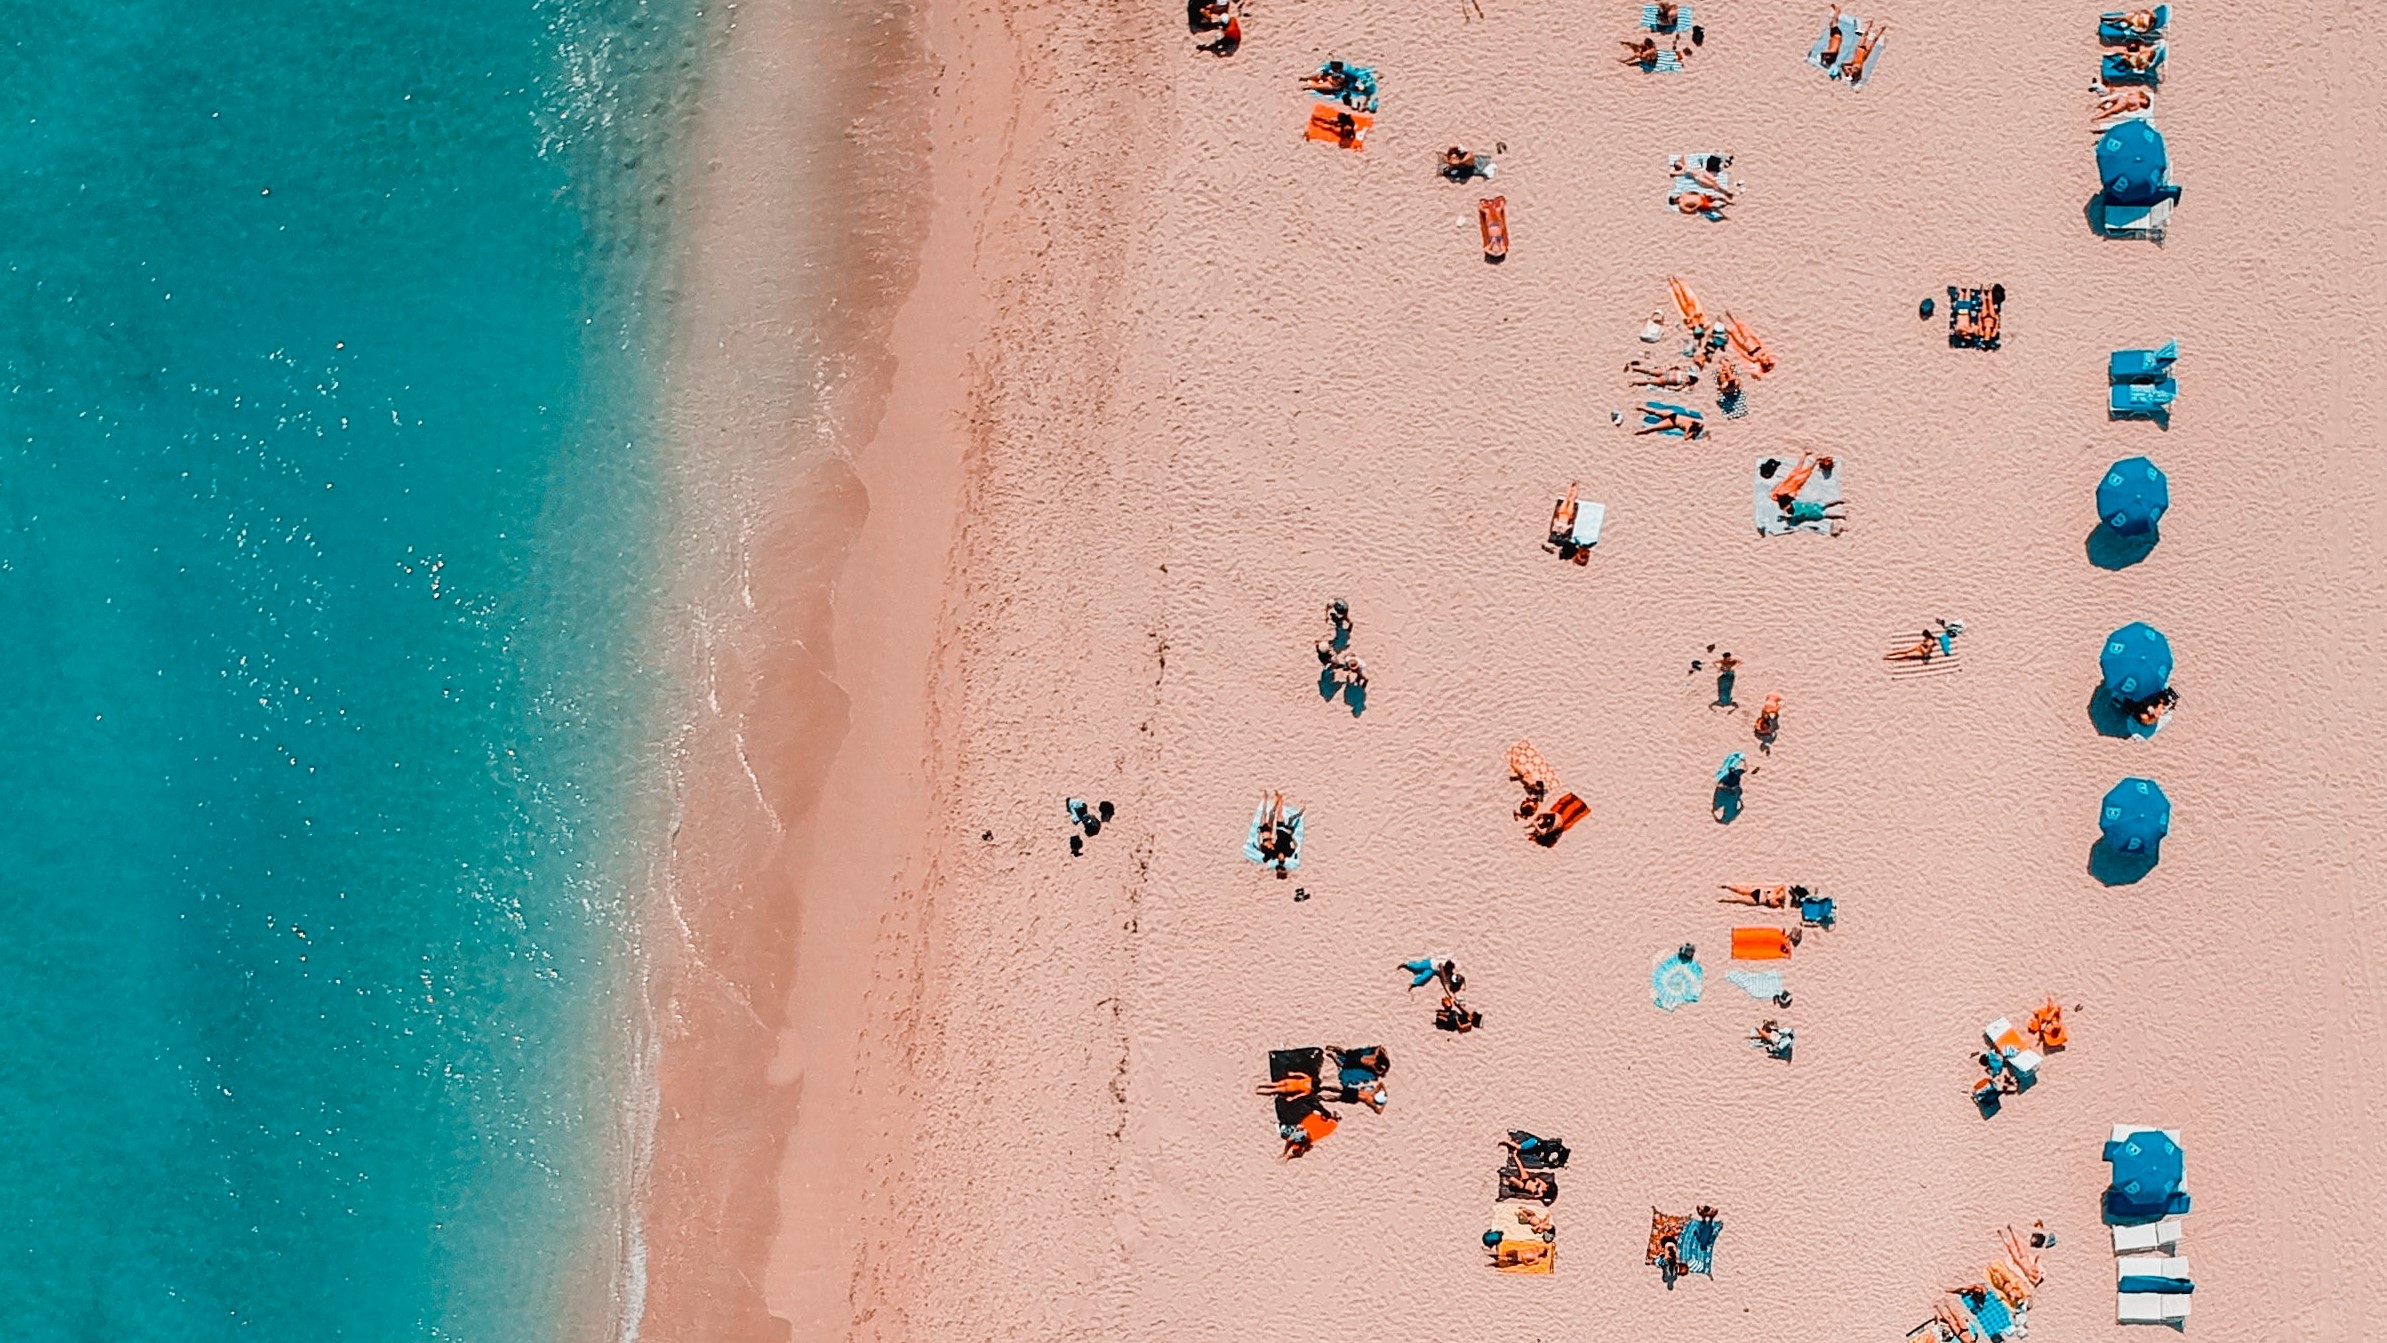 Bird's eye view of people relaxing on a beach.